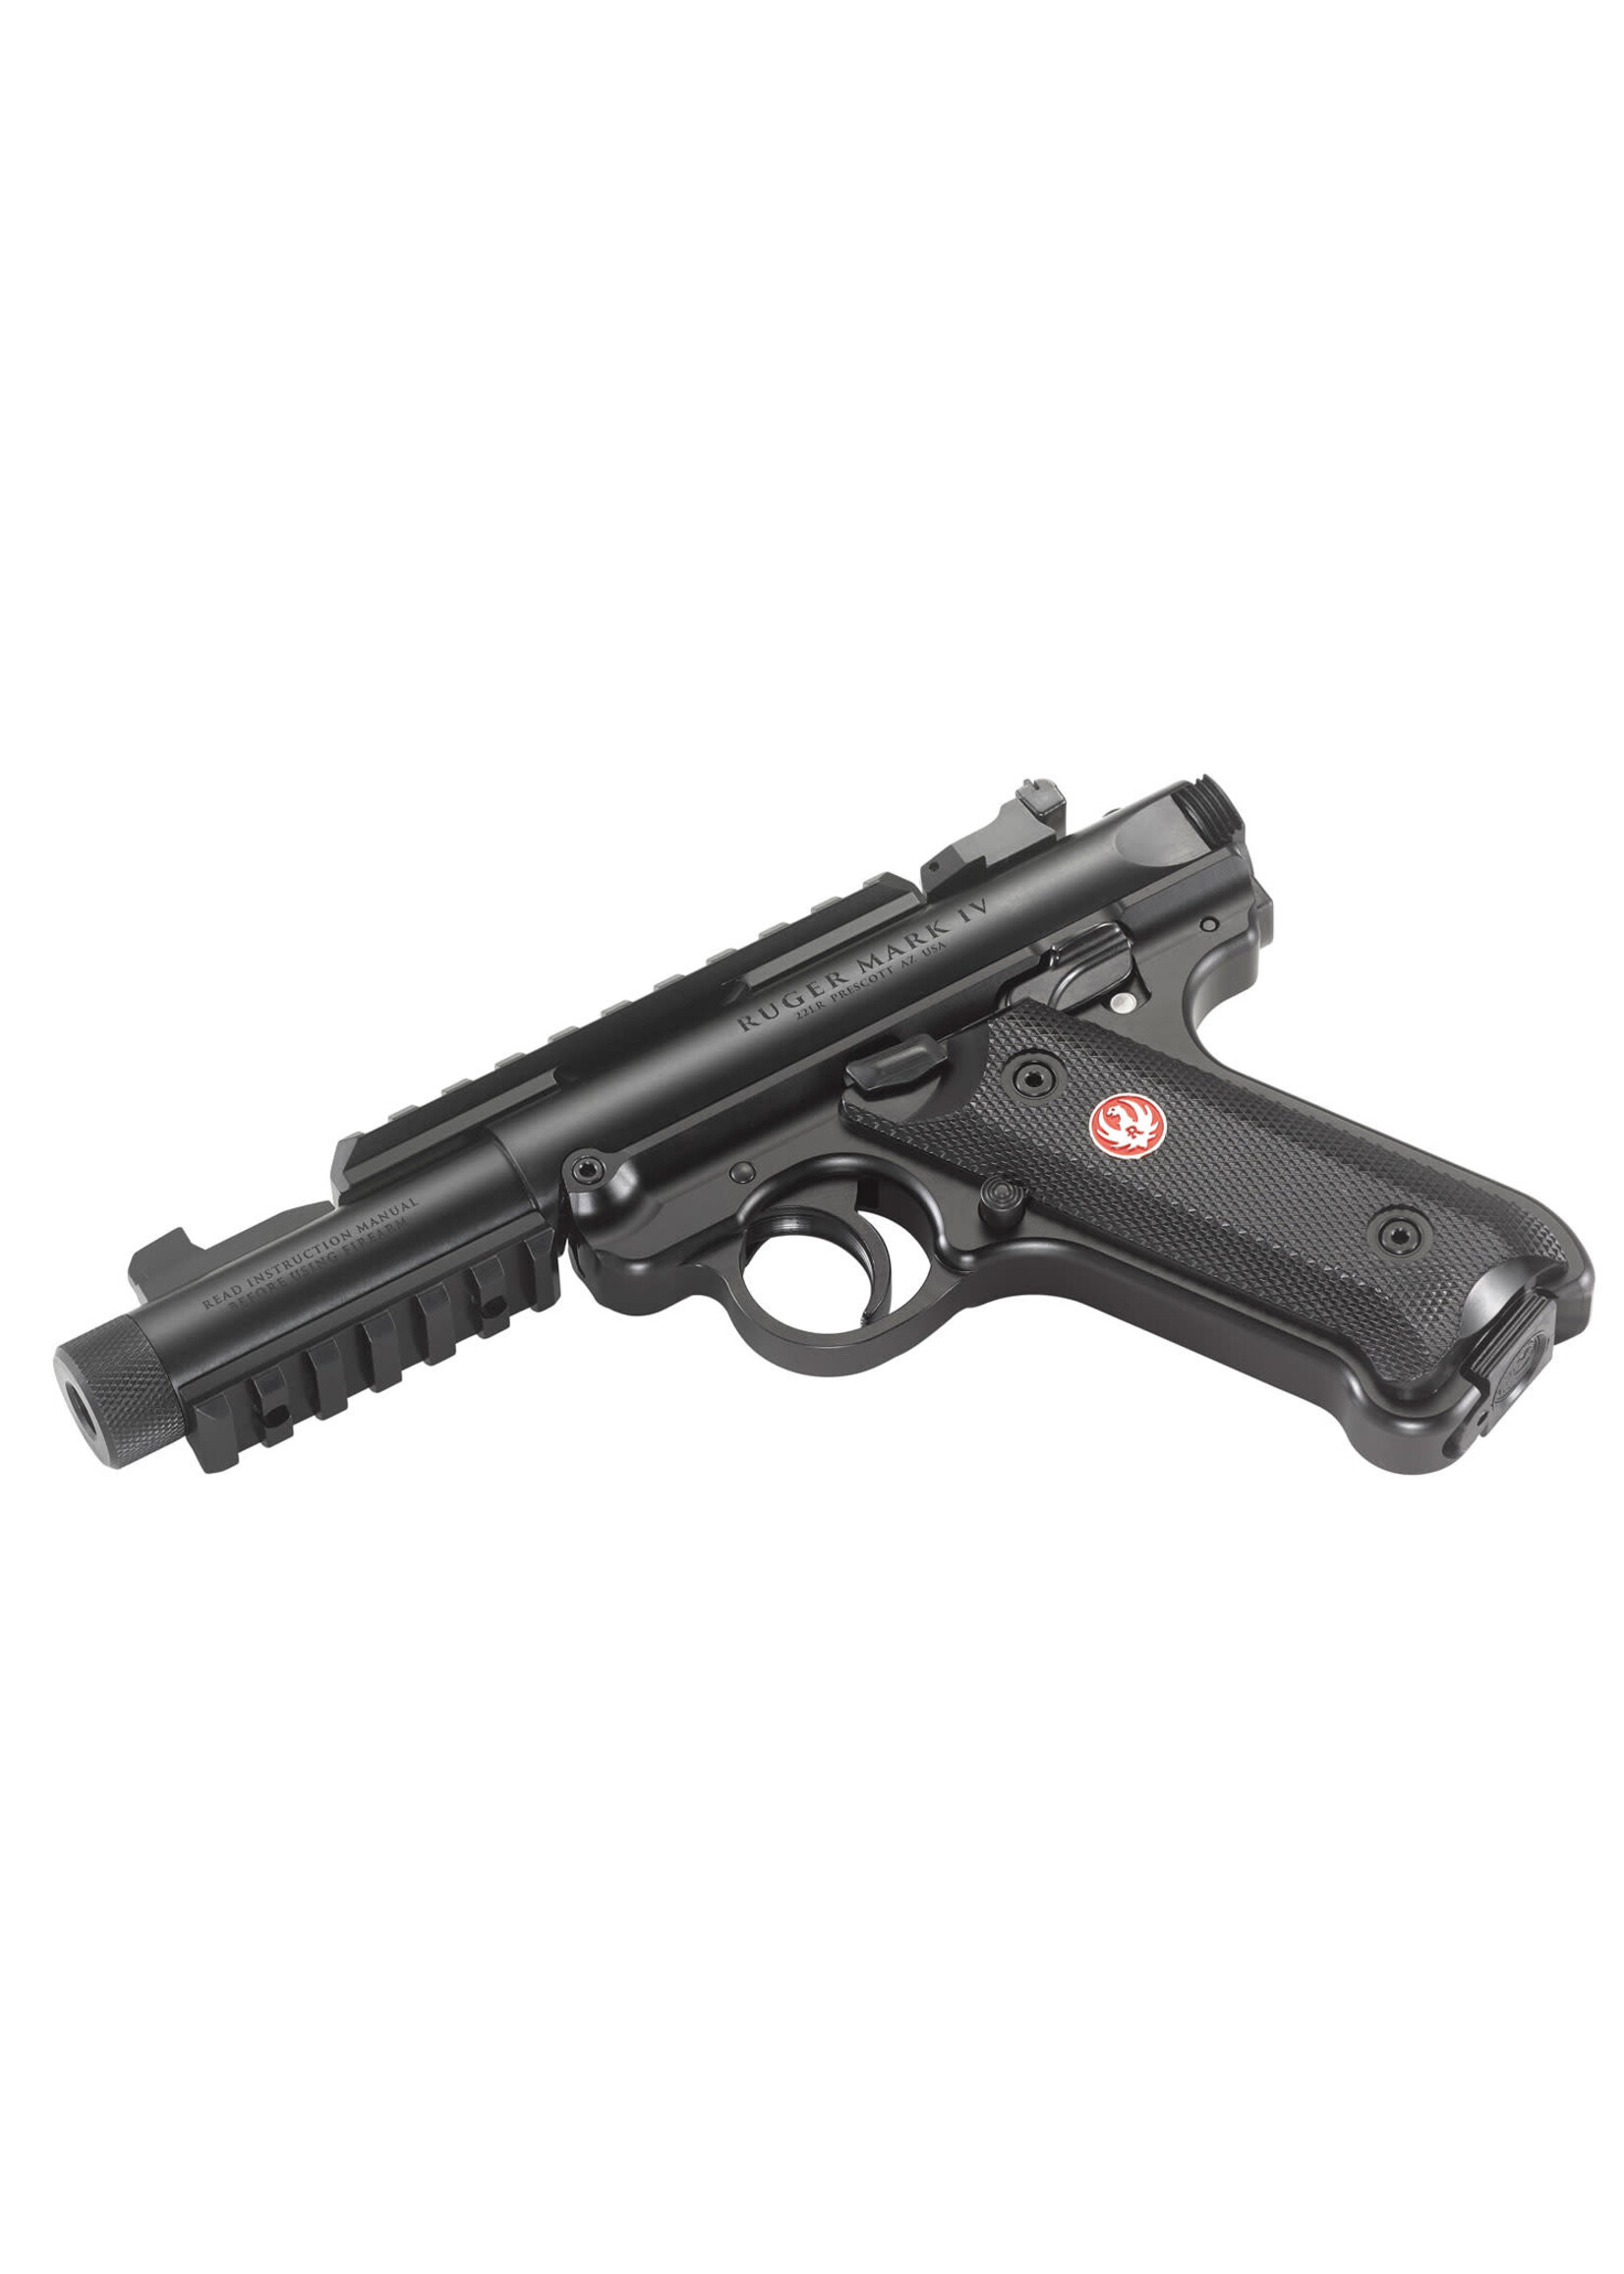 Ruger Ruger 40150 Mark IV Tactical 22 LR 4.40" Threaded Barrel 10+1, Blued Blued Alloy Steel, Aluminum Grip Frame With Checkered Polymer Grip, Top & Bottom Picatinny Rails, Ambidextrous Manual Safety, Optics Ready